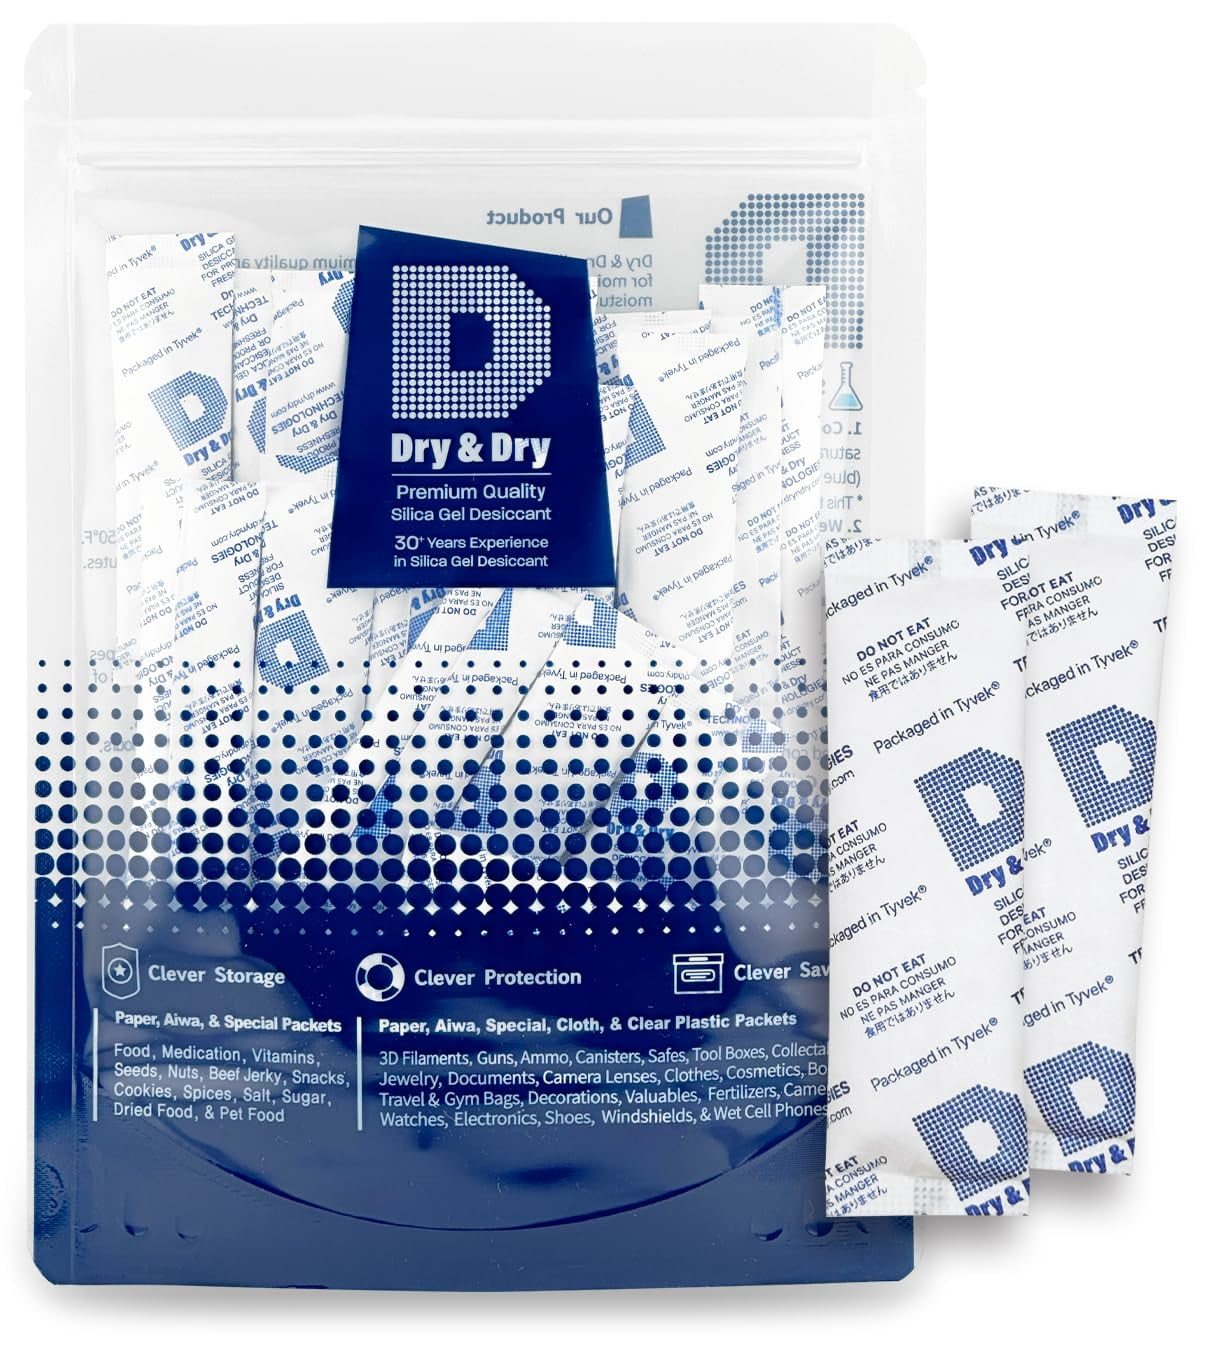 DIFRAX SUCETTE NATURAL 20+ - Pharmacodel